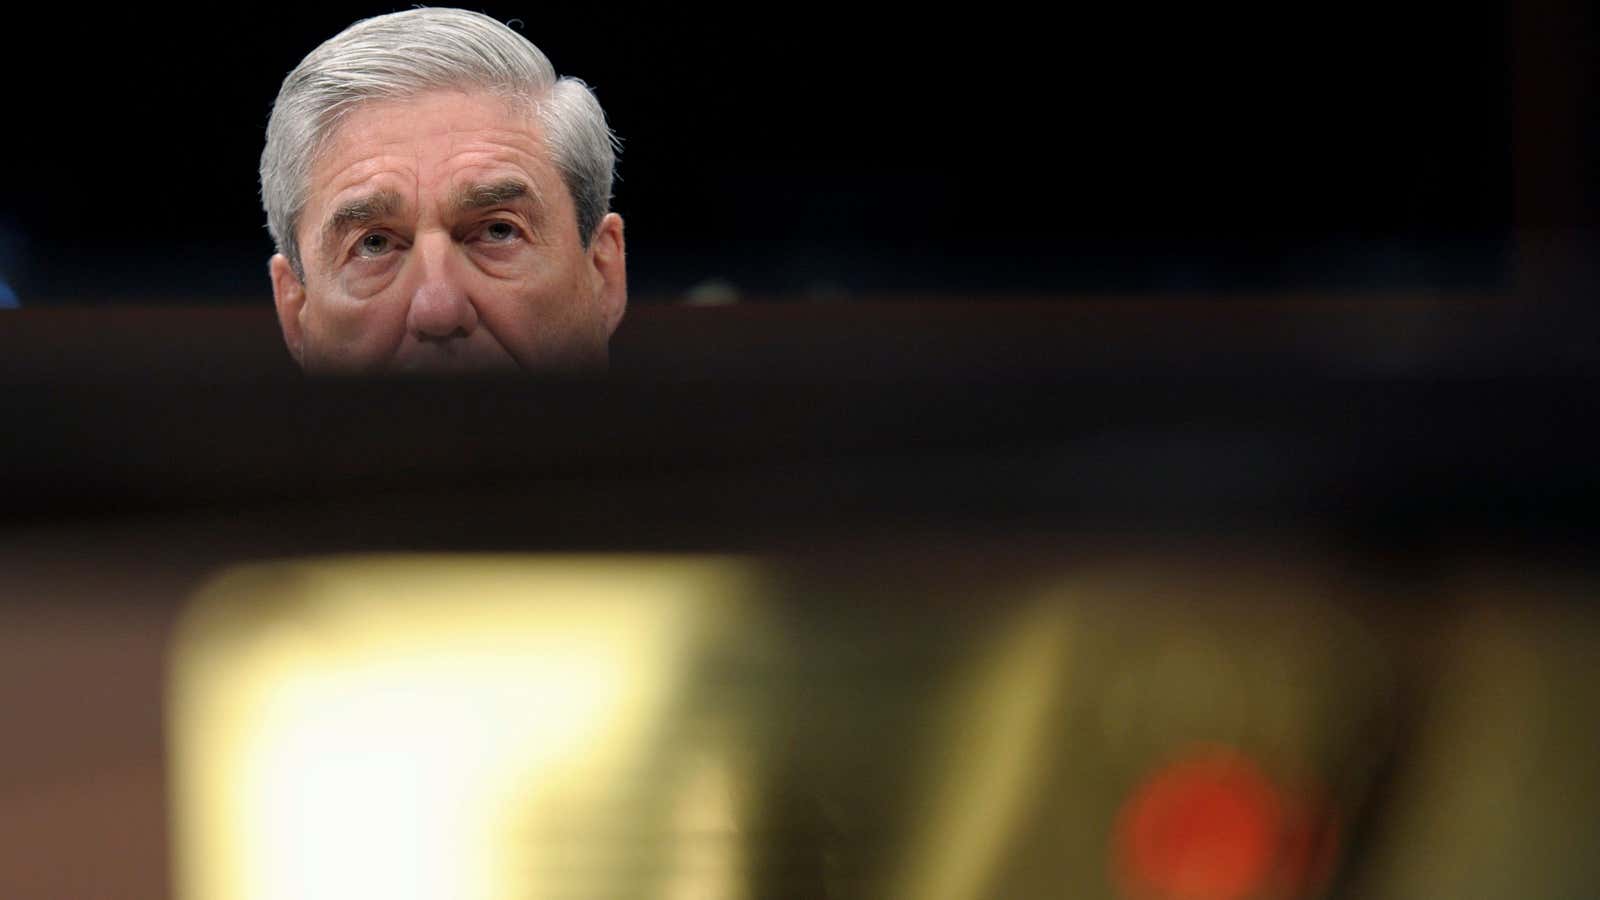 You can see some, but not all, of the Mueller report.